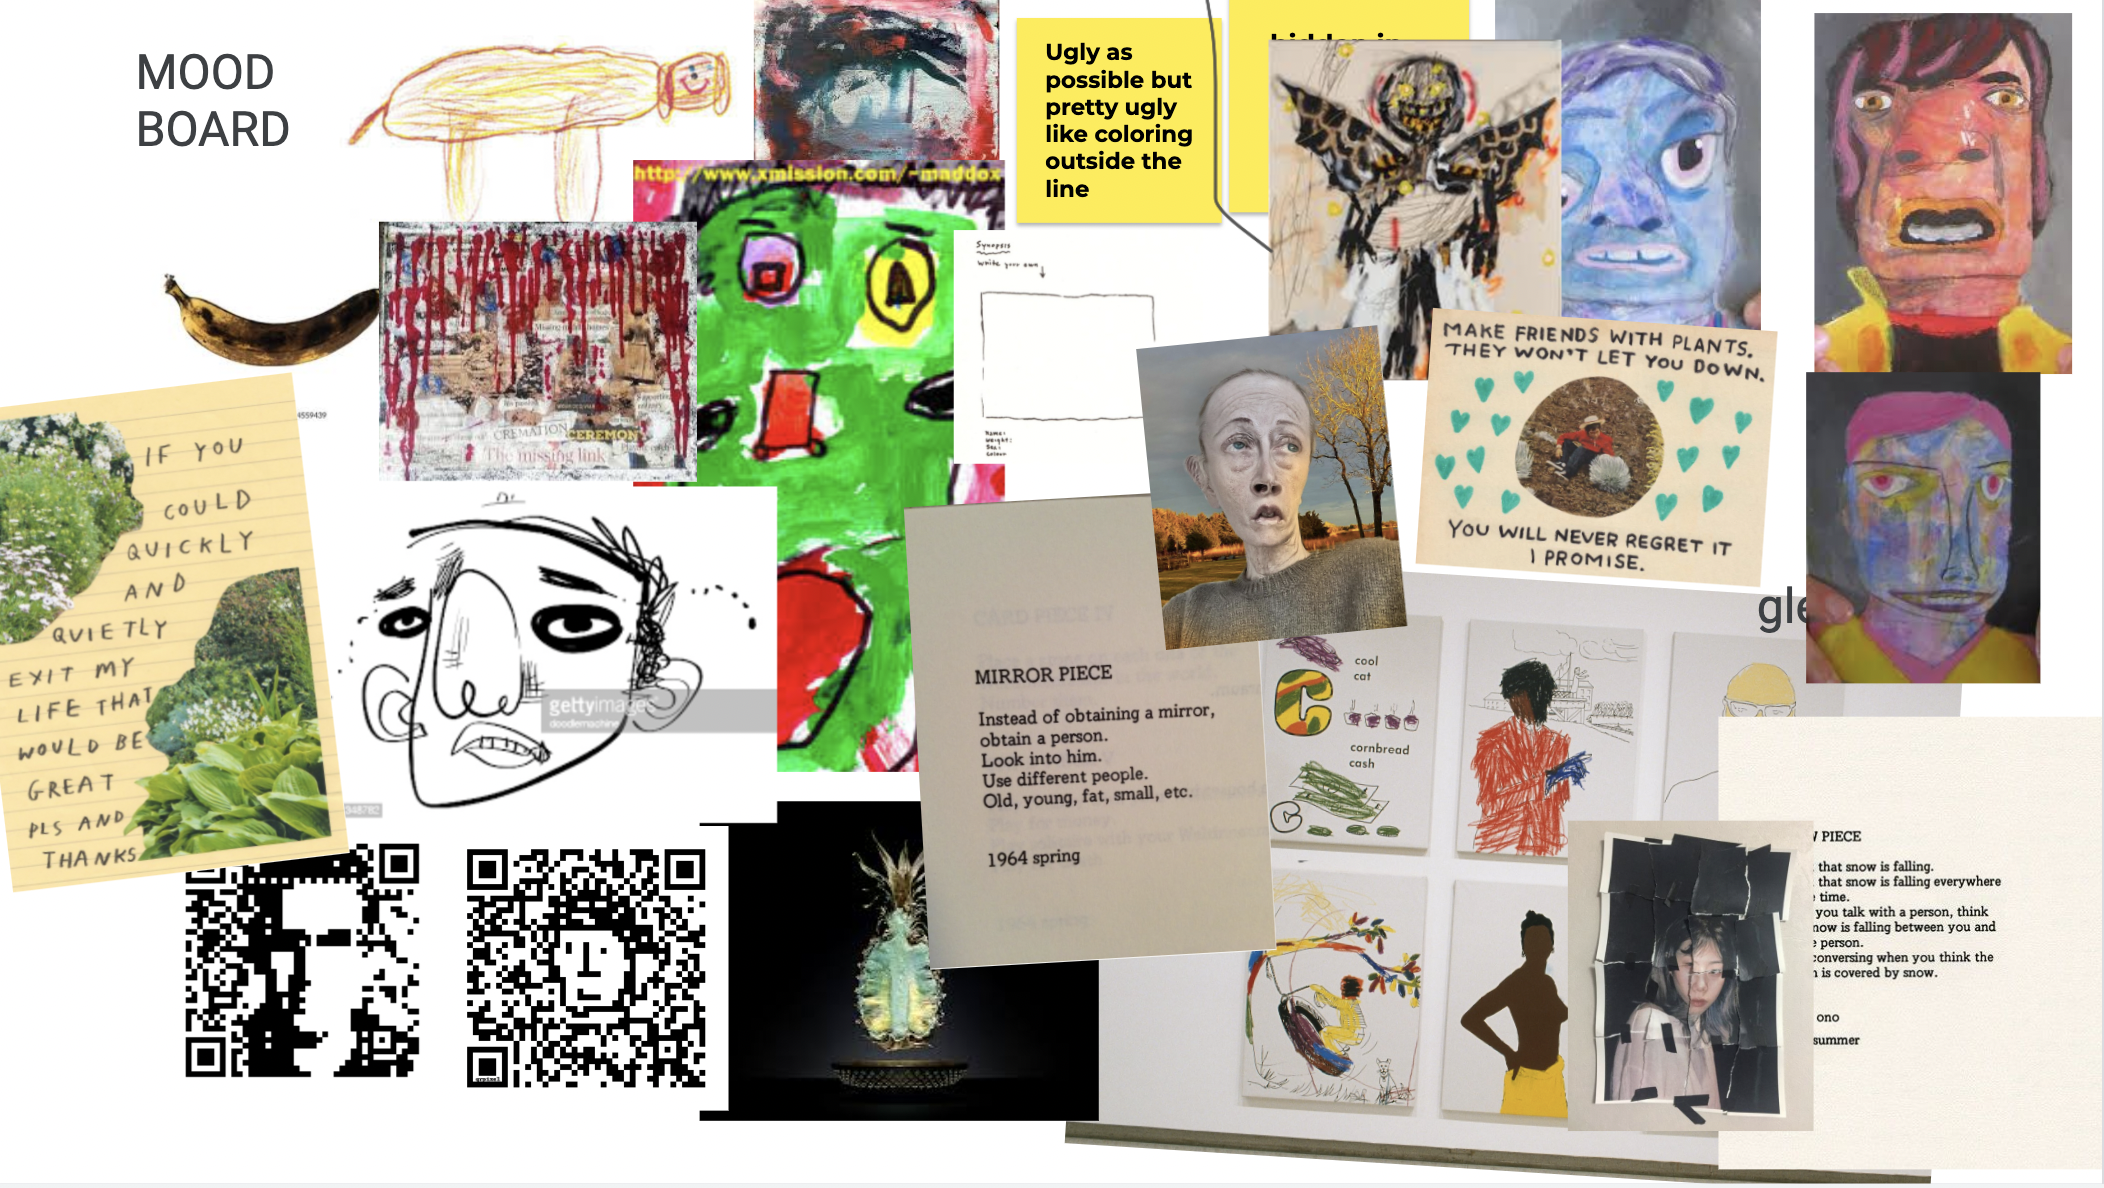 Screenshot of digital mood board with many layered images: drawings, faces, poems, post-its, QR codes.